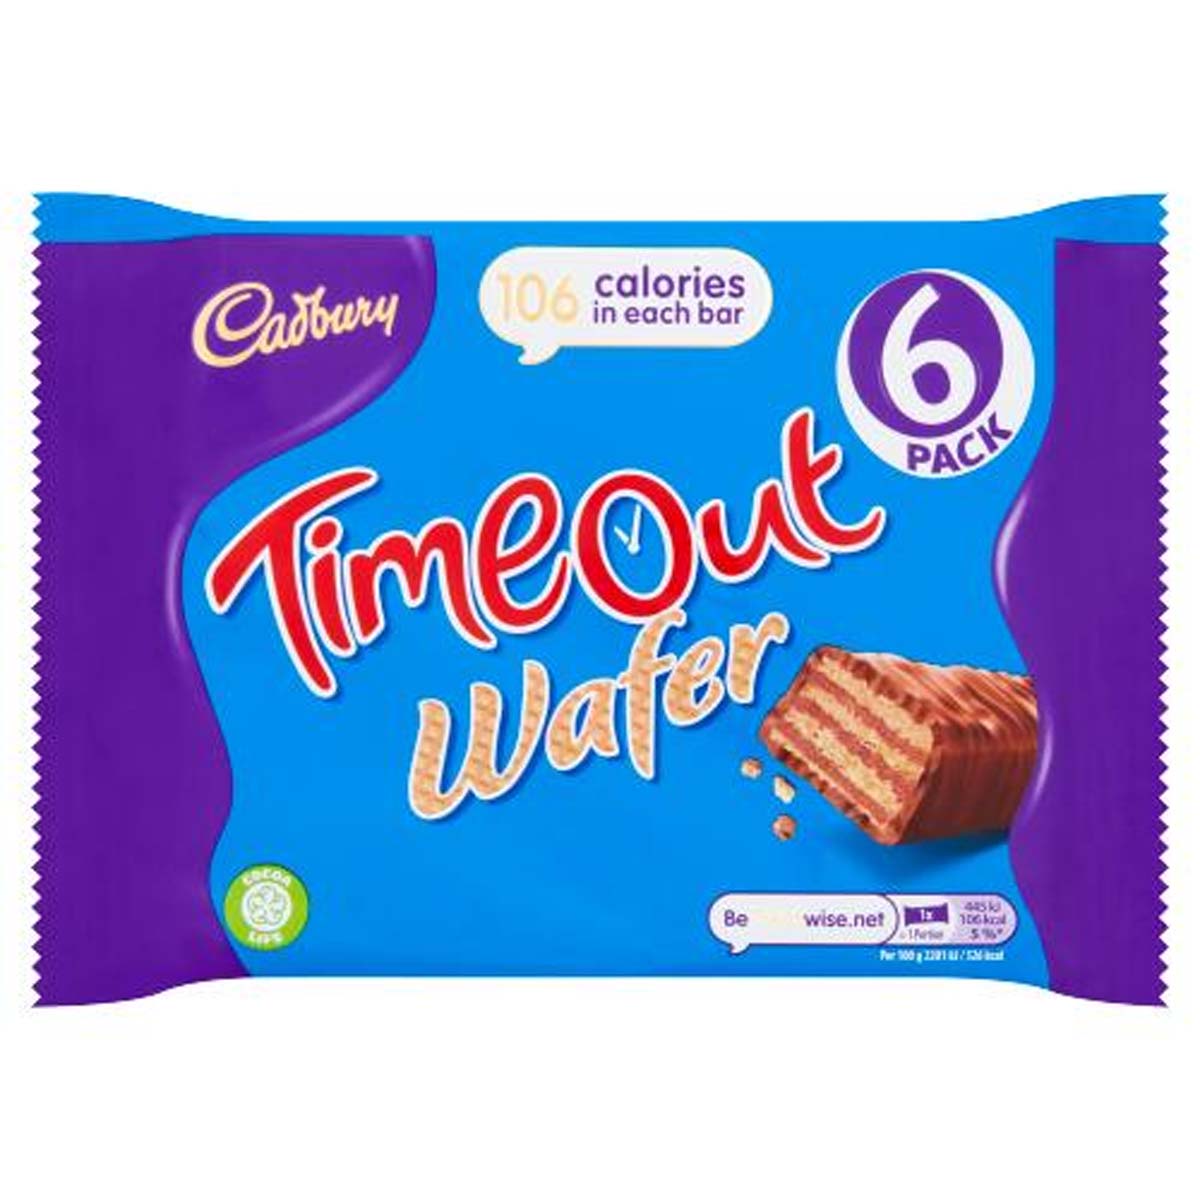 Cadbury - Timeout Wafer Bar - 6 Pack 121.2g - Continental Food Store